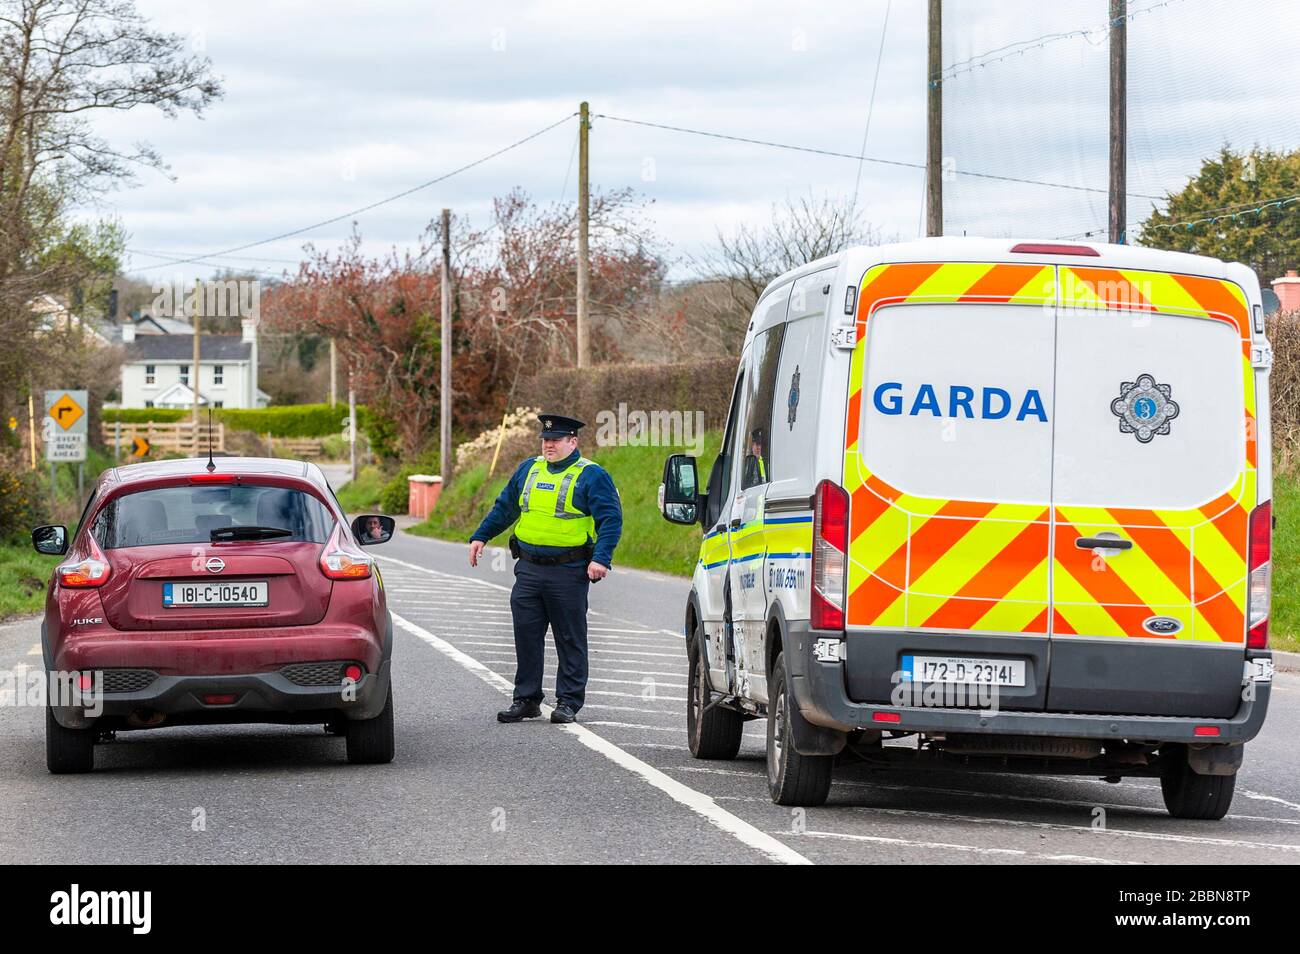 Clonakilty, West Cork, Ireland. 1st Apr, 2020. As part of the mandatory 'Stay at Home' order imposed by the Irish government on Friday last, the Gardai have been tasked to ensure people are complying to help stop the spread of Covid-19. A Garda Checkpoint was in place on the Clonakilty to Dunmanway road this afternoon which consisted of 2 regular Gardai. Credit: AG News/Alamy Live News Stock Photo